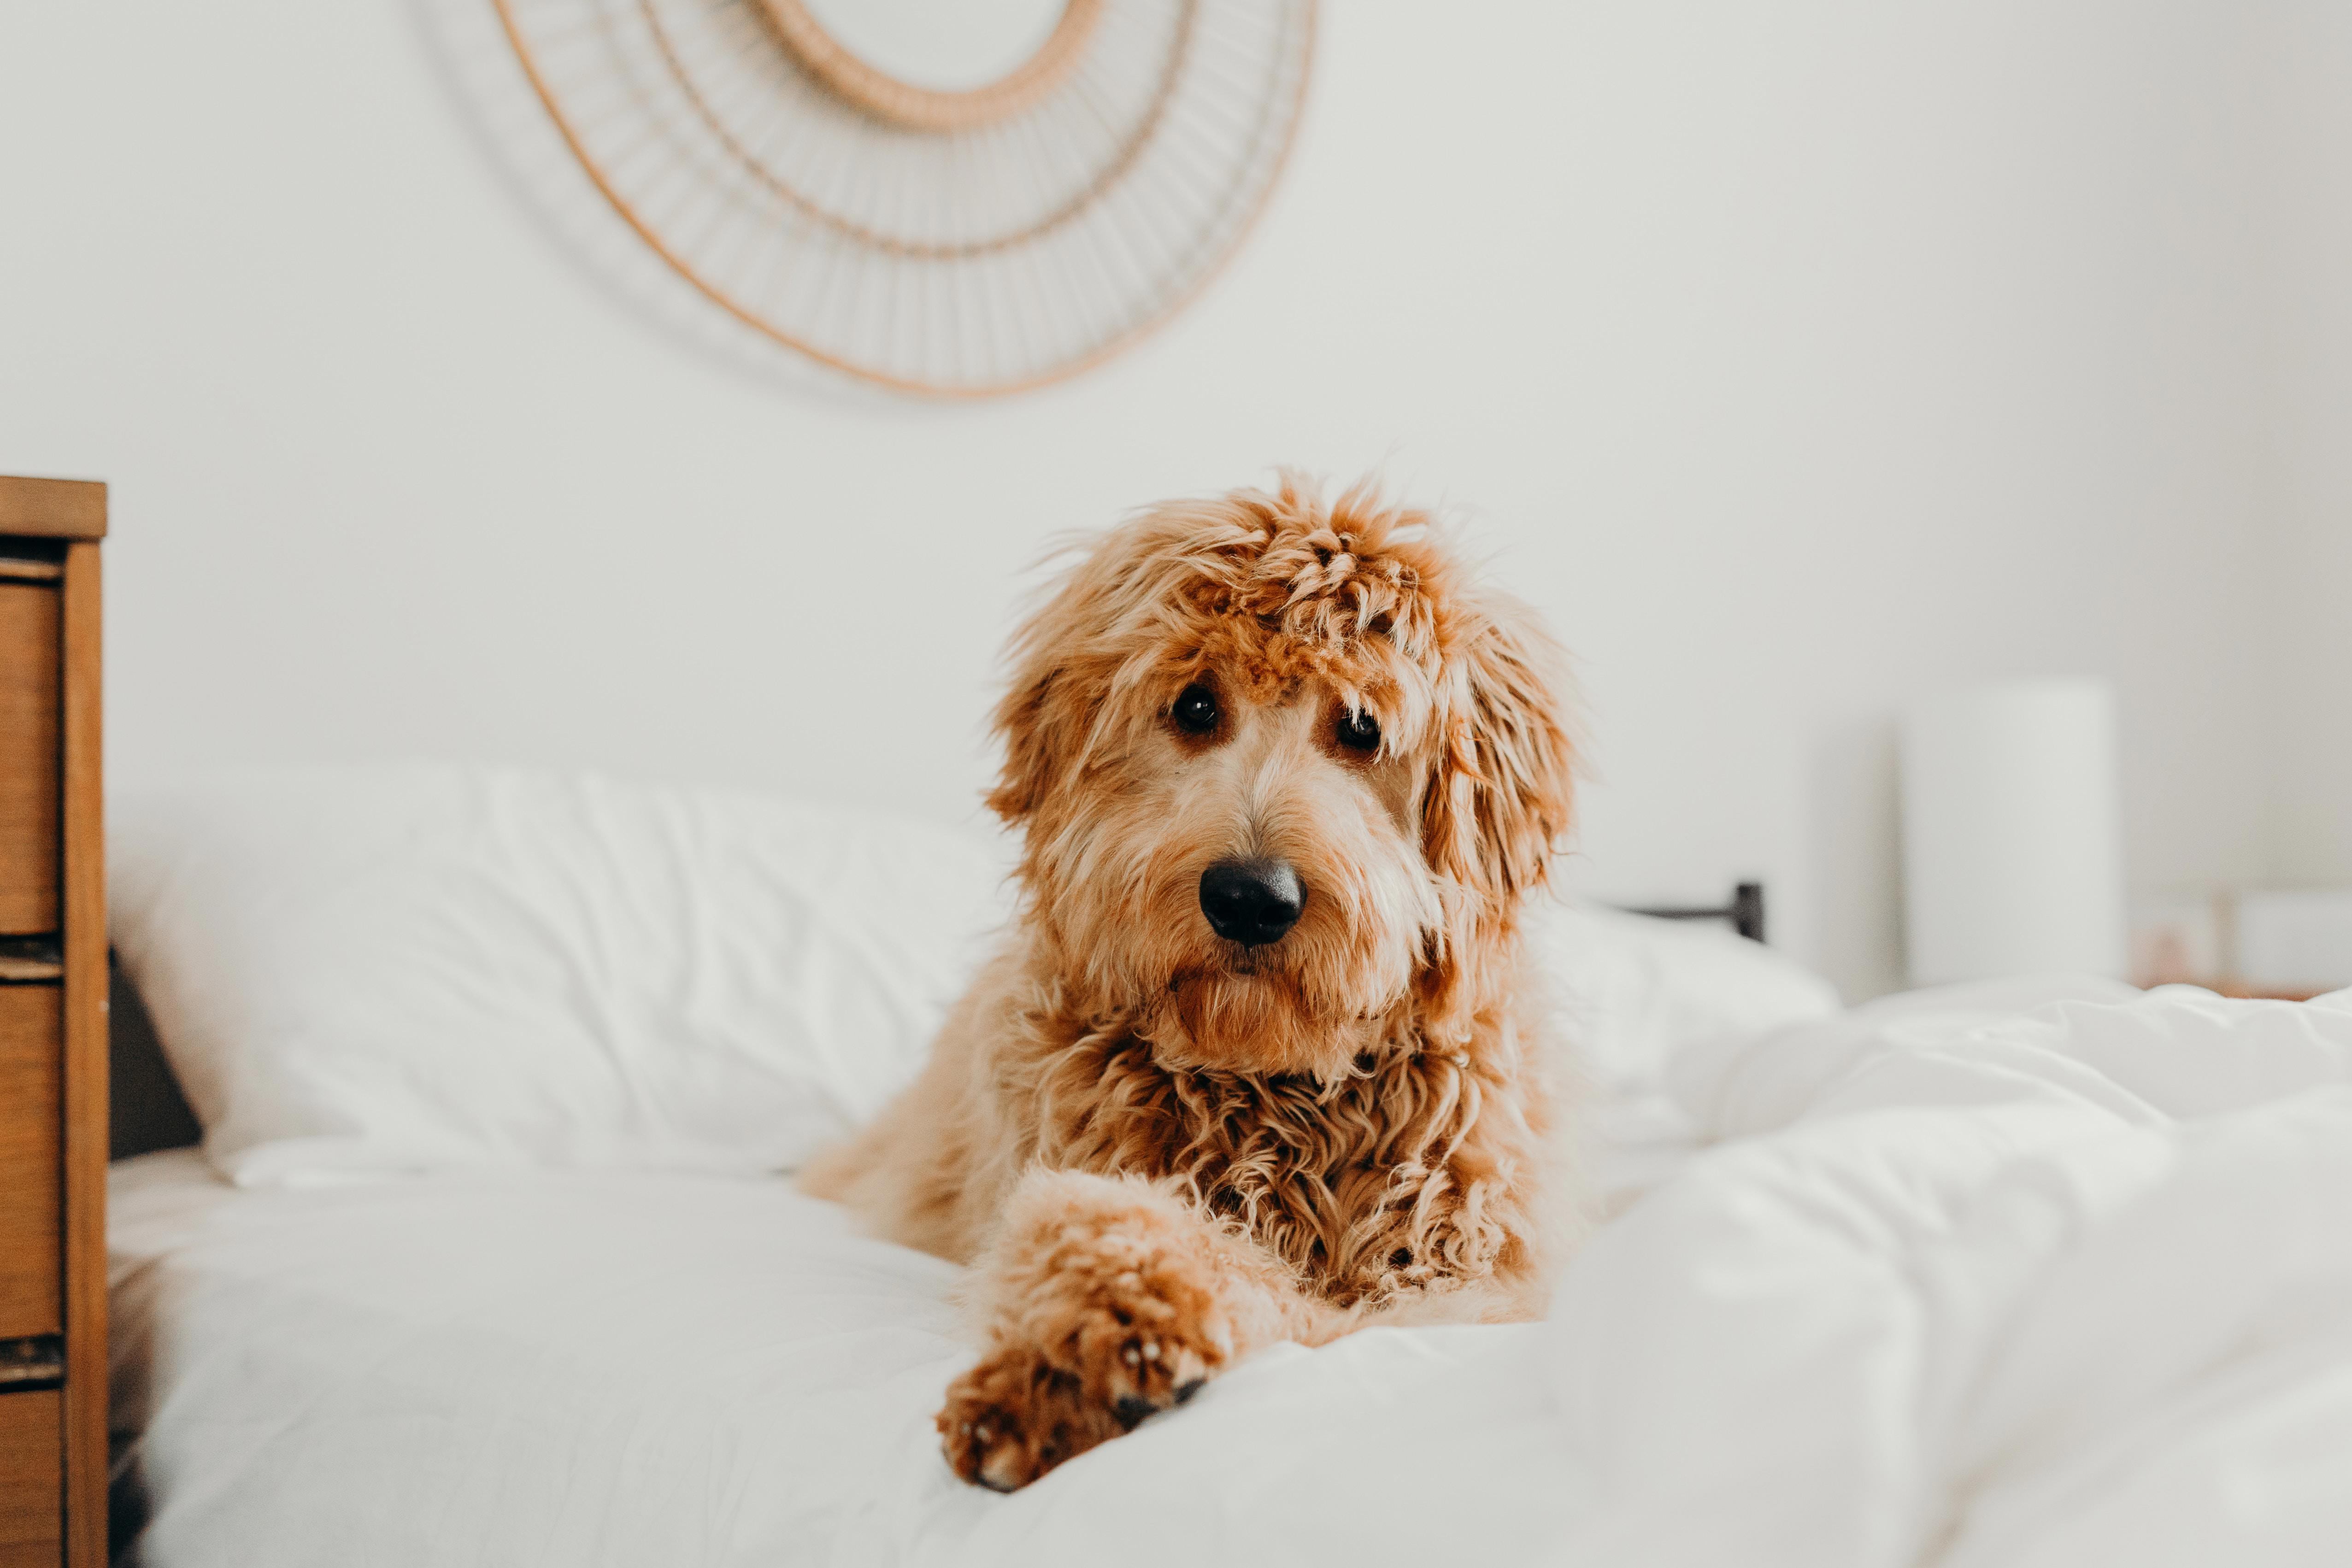 "When Will Your Mini Goldendoodle Reach Full Size? Understanding Their Growth Cycle"